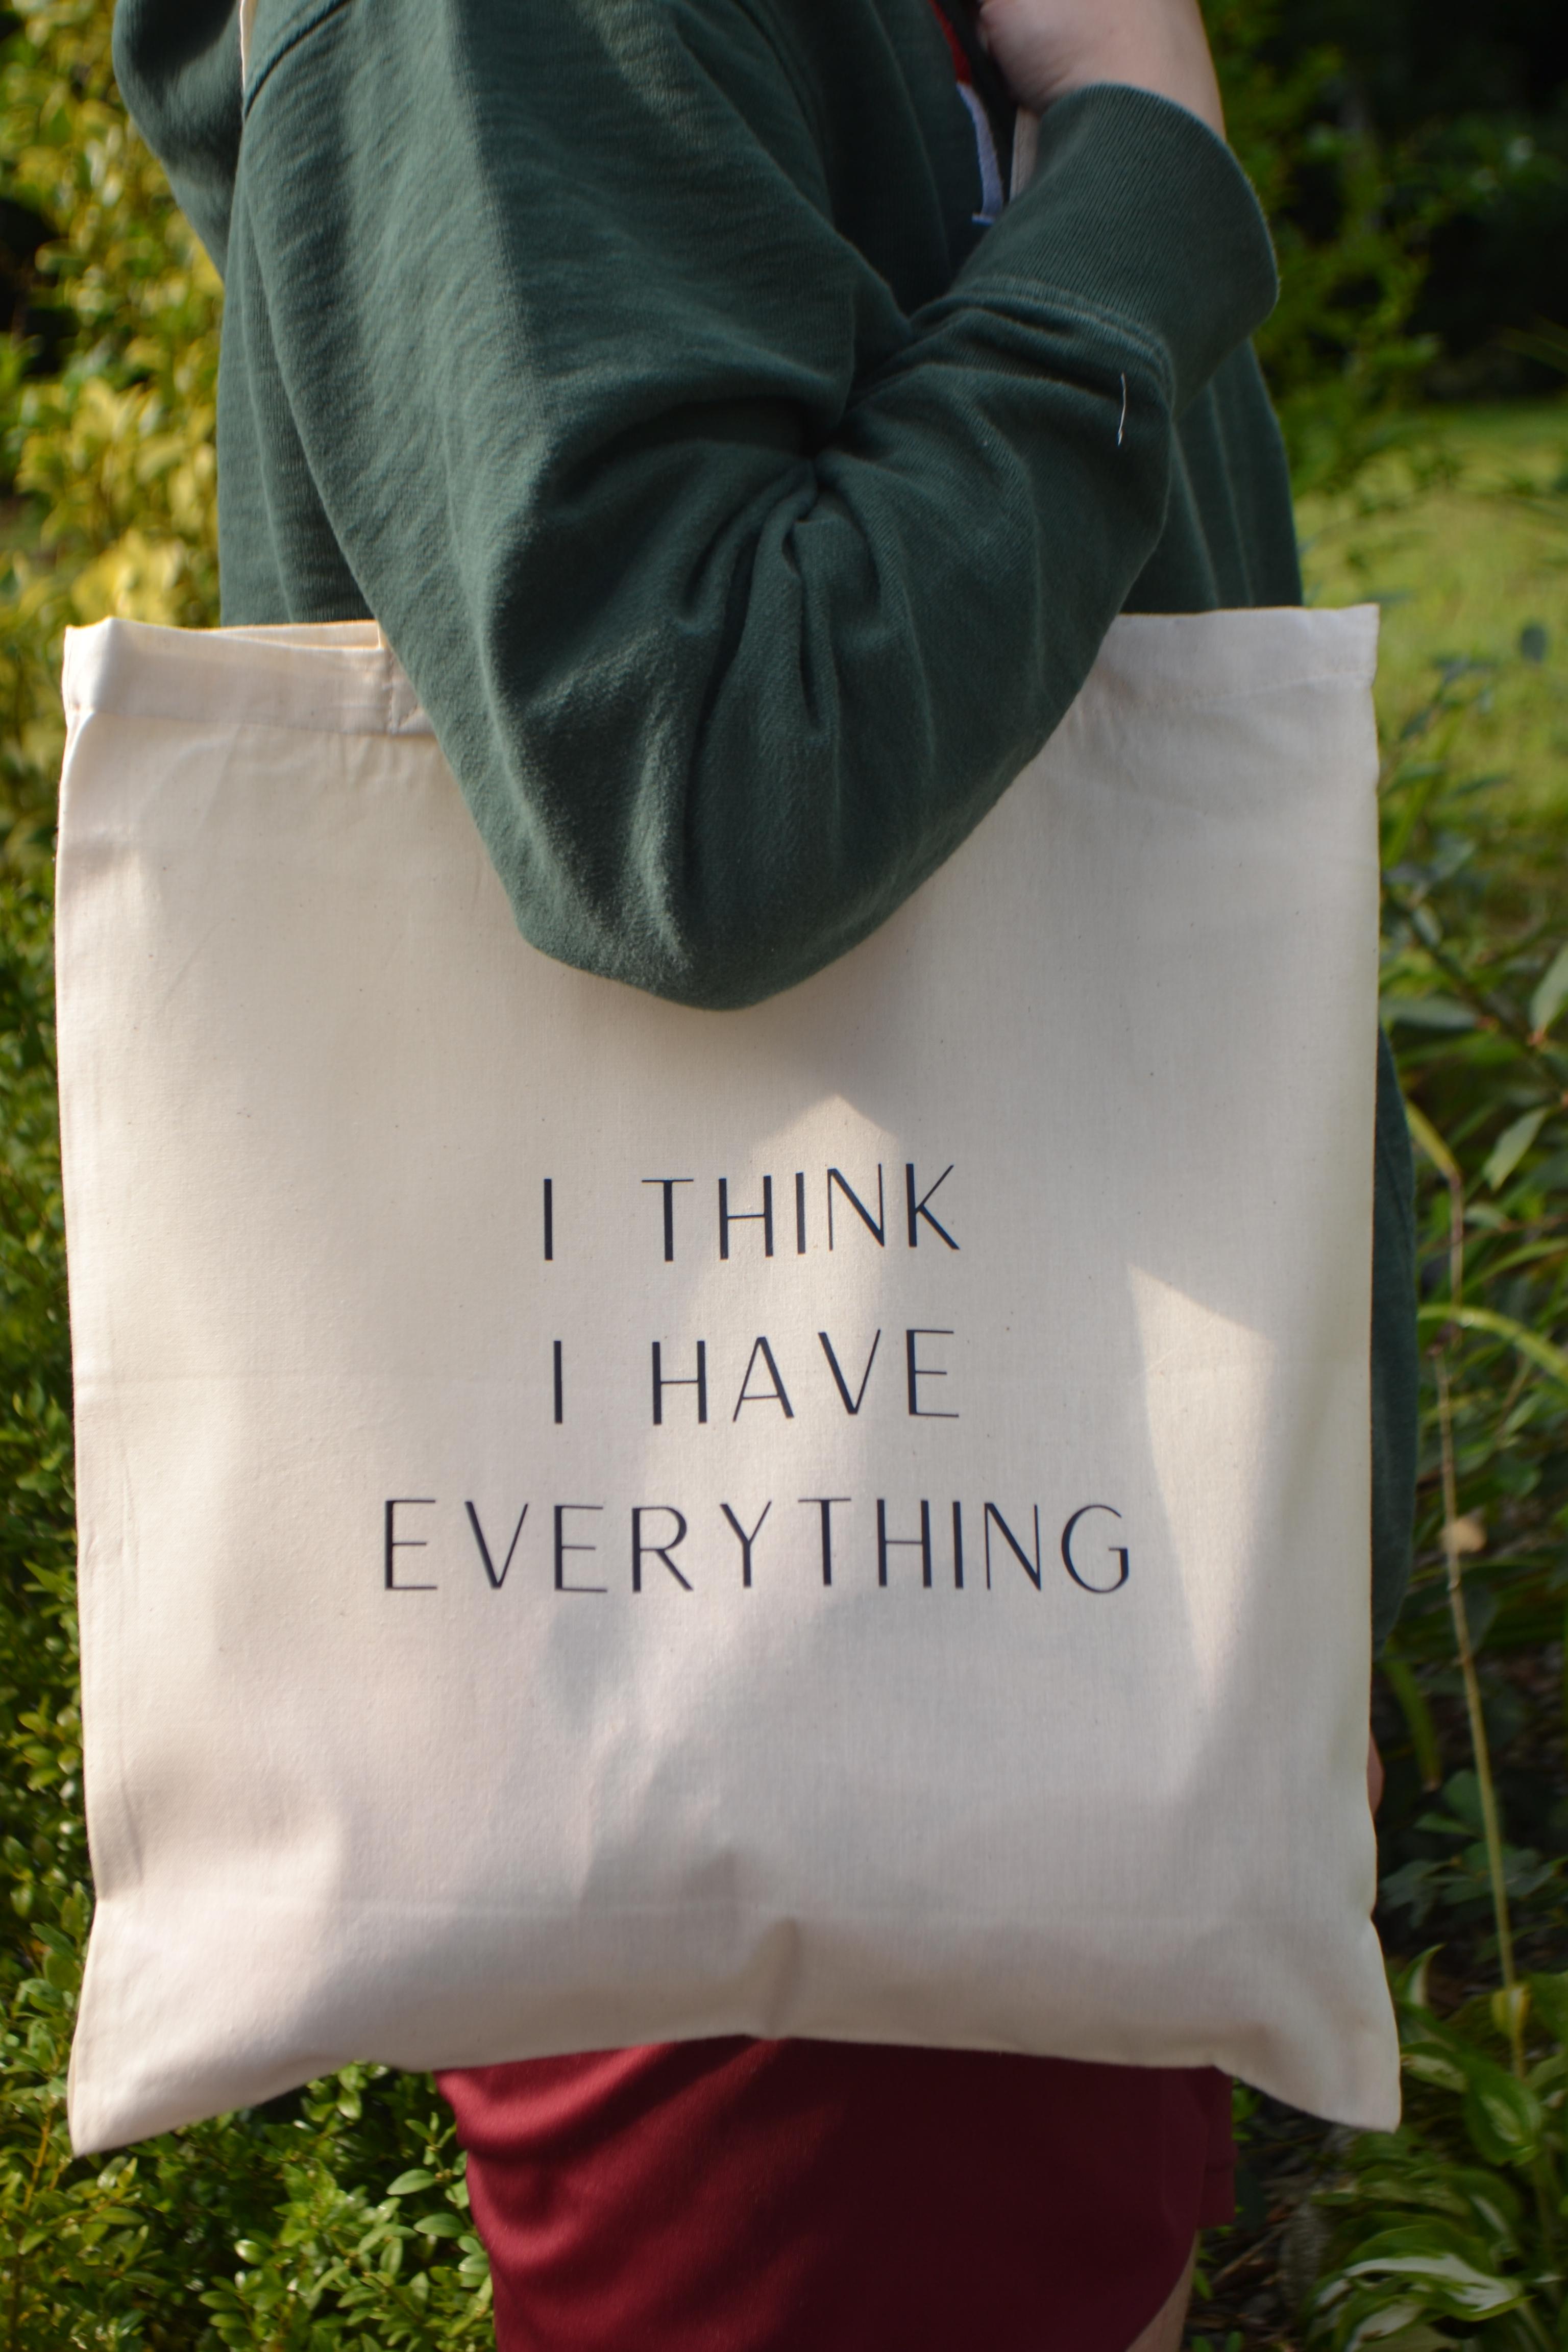 'I THINK I HAVE EVERYTHING' Tote